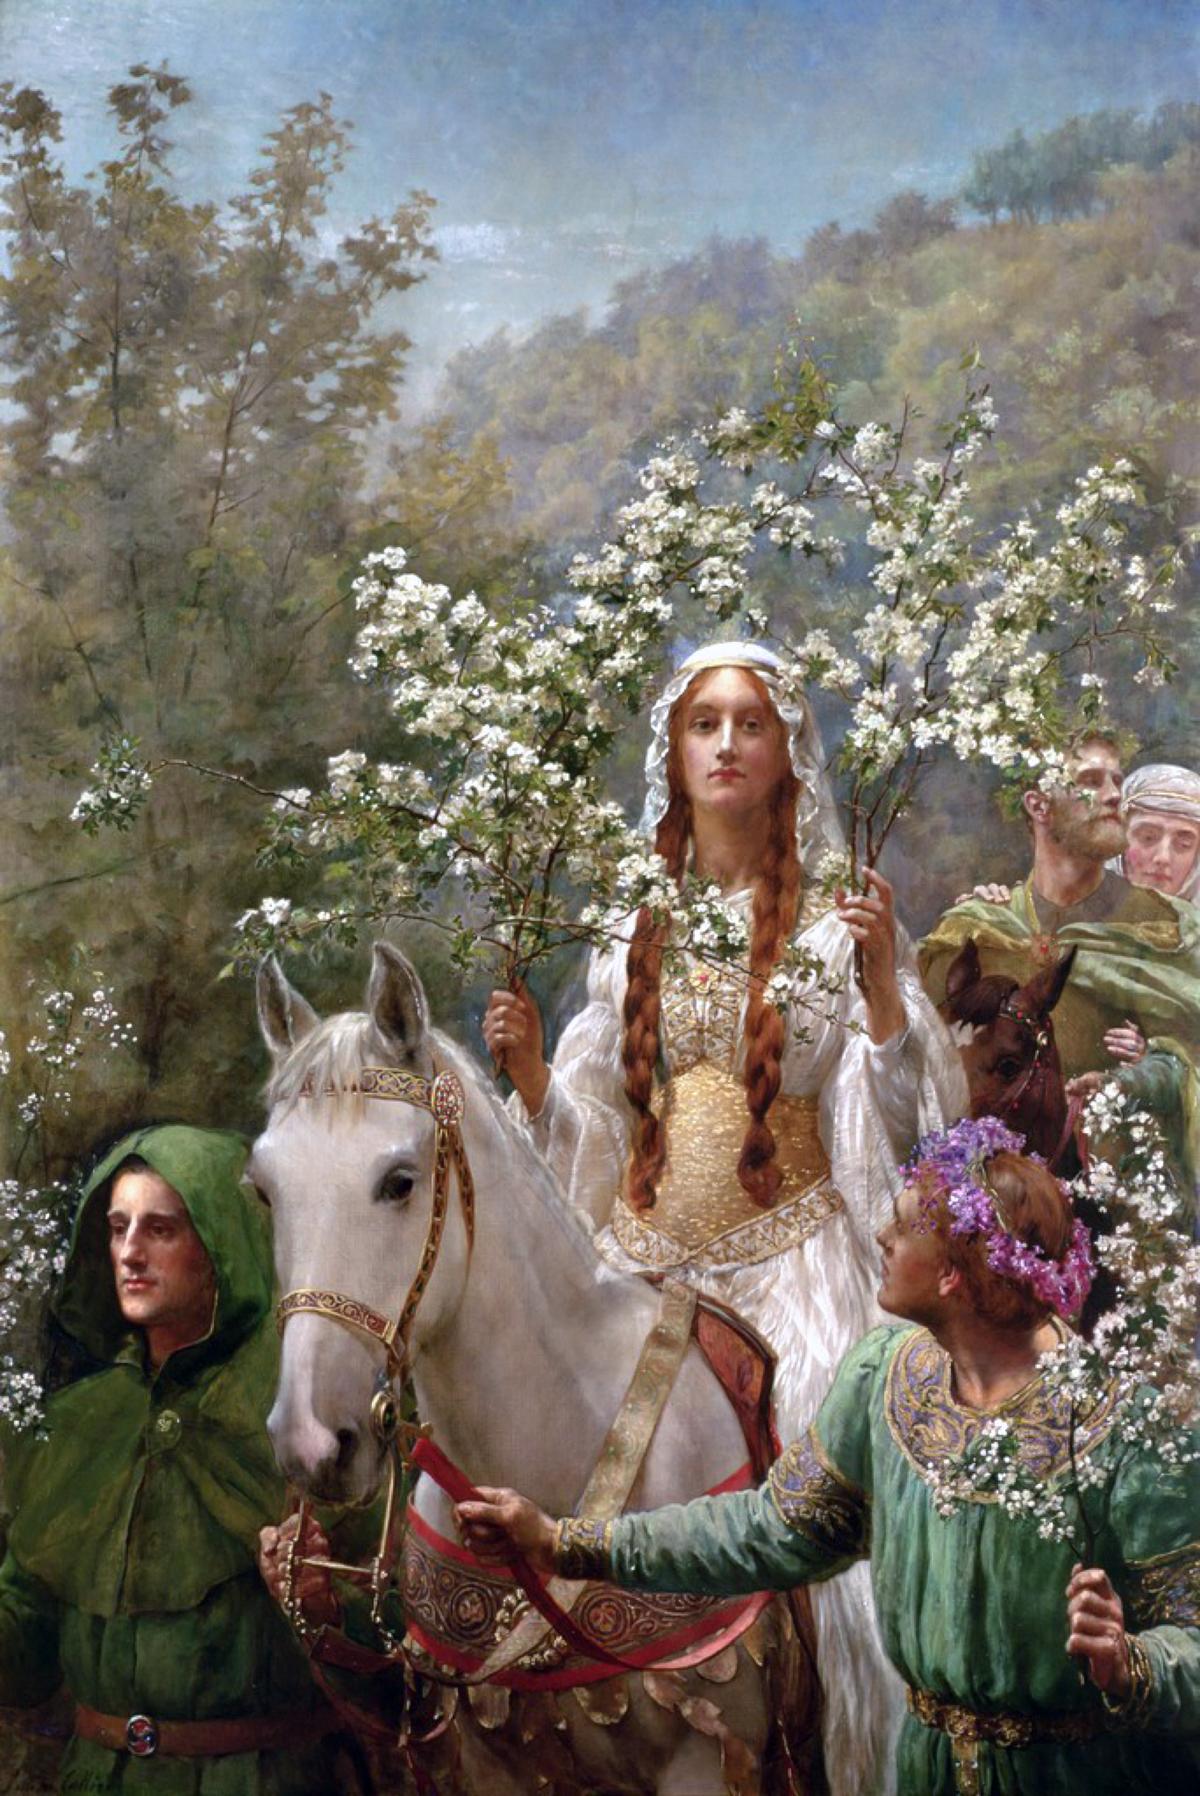  "Queen Guinevere's Maying," 1900, by John Collier. Oil on canvas. Cartwright Hall Art Gallery, Bradford, England. (Public Domain)